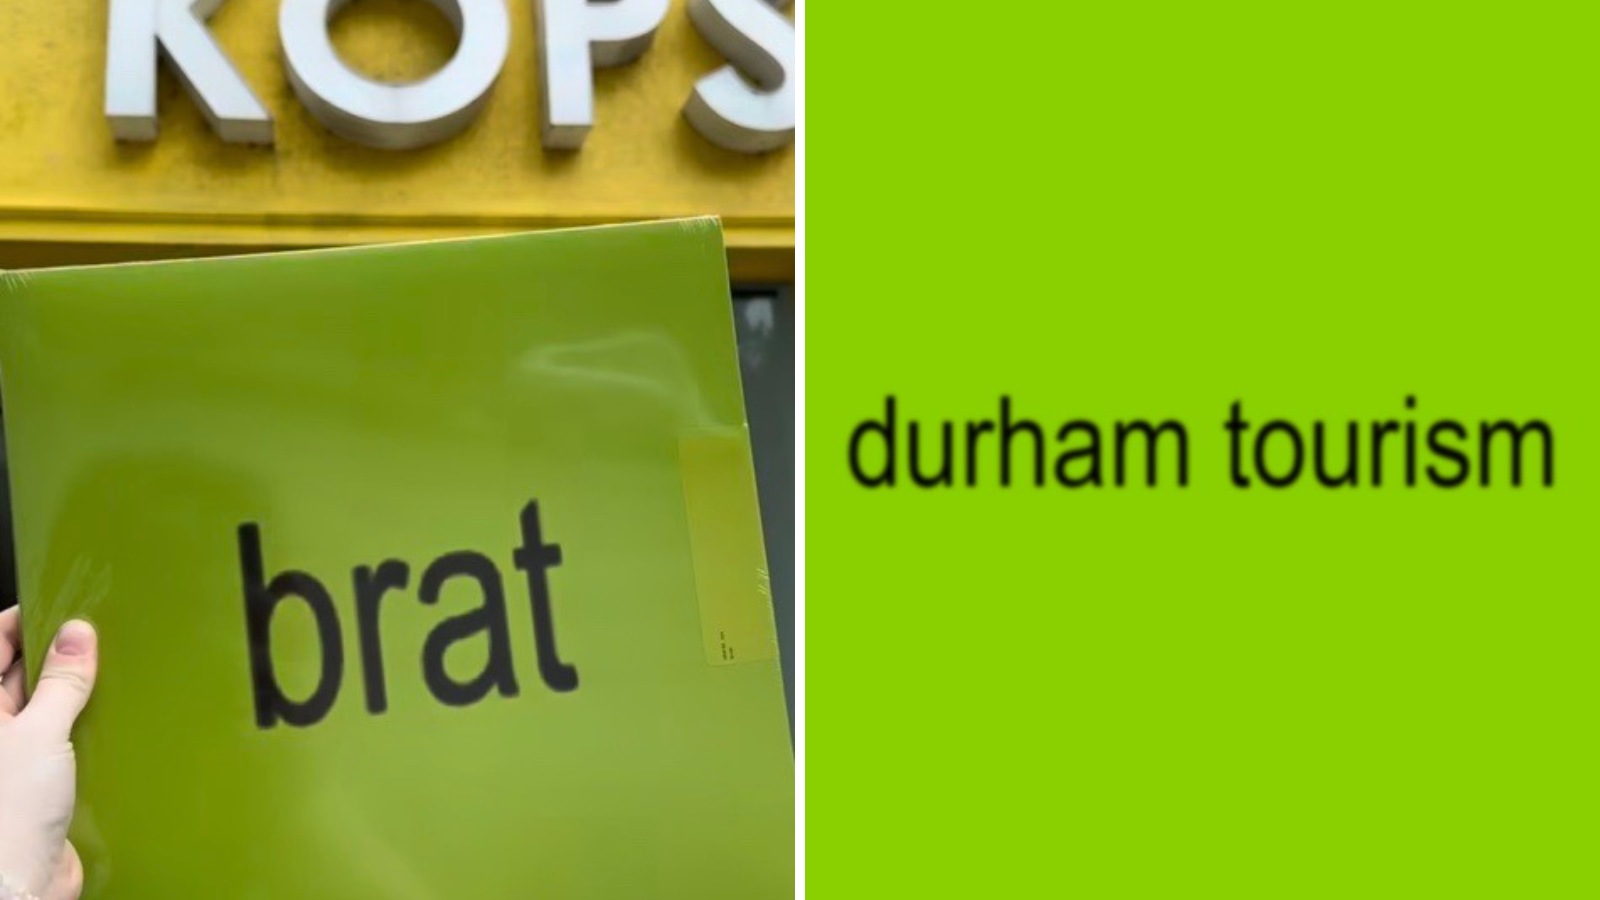 Collage of images including a person holding the Charli XCX album "Brat" in front of a record store and the words "Durham Tourism" on a lime green background to look like the "Brat" album cover